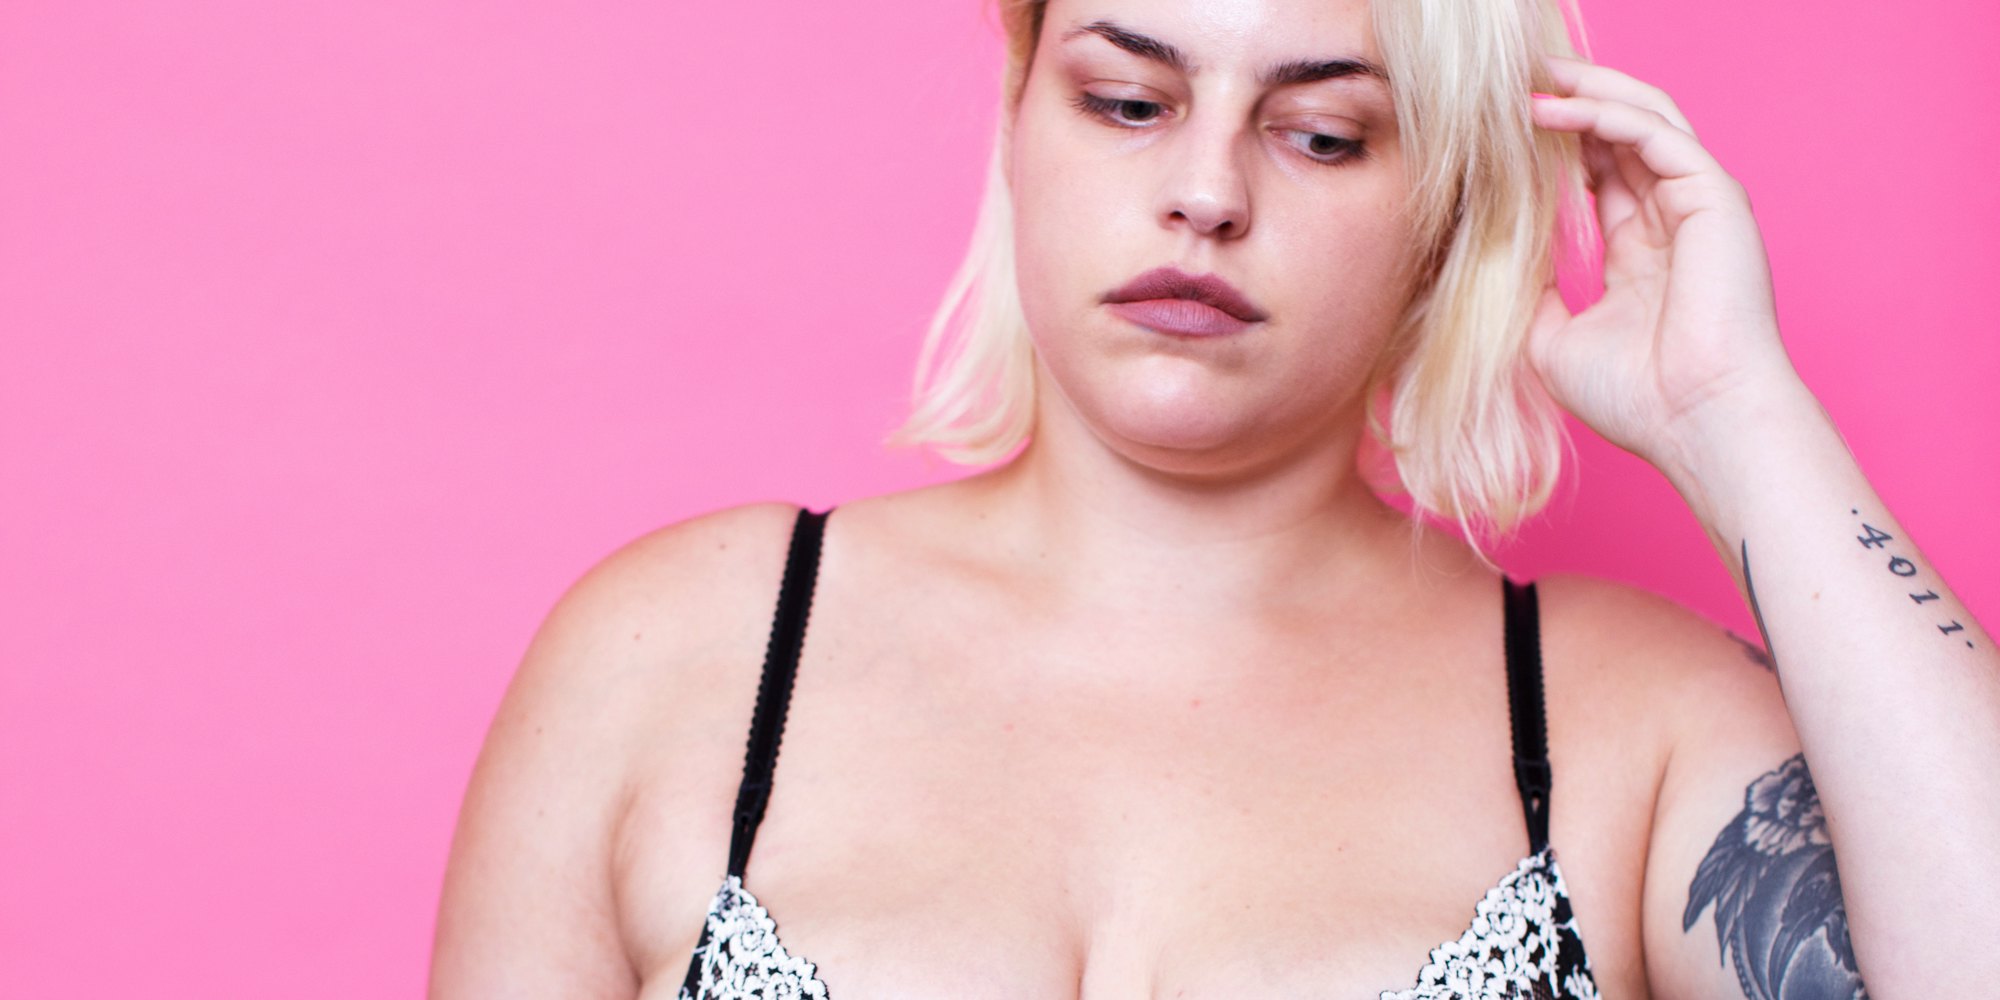 Sex Fakked D - Women Who Can't Orgasm Reveal What Their Sex Lives Are Really Like